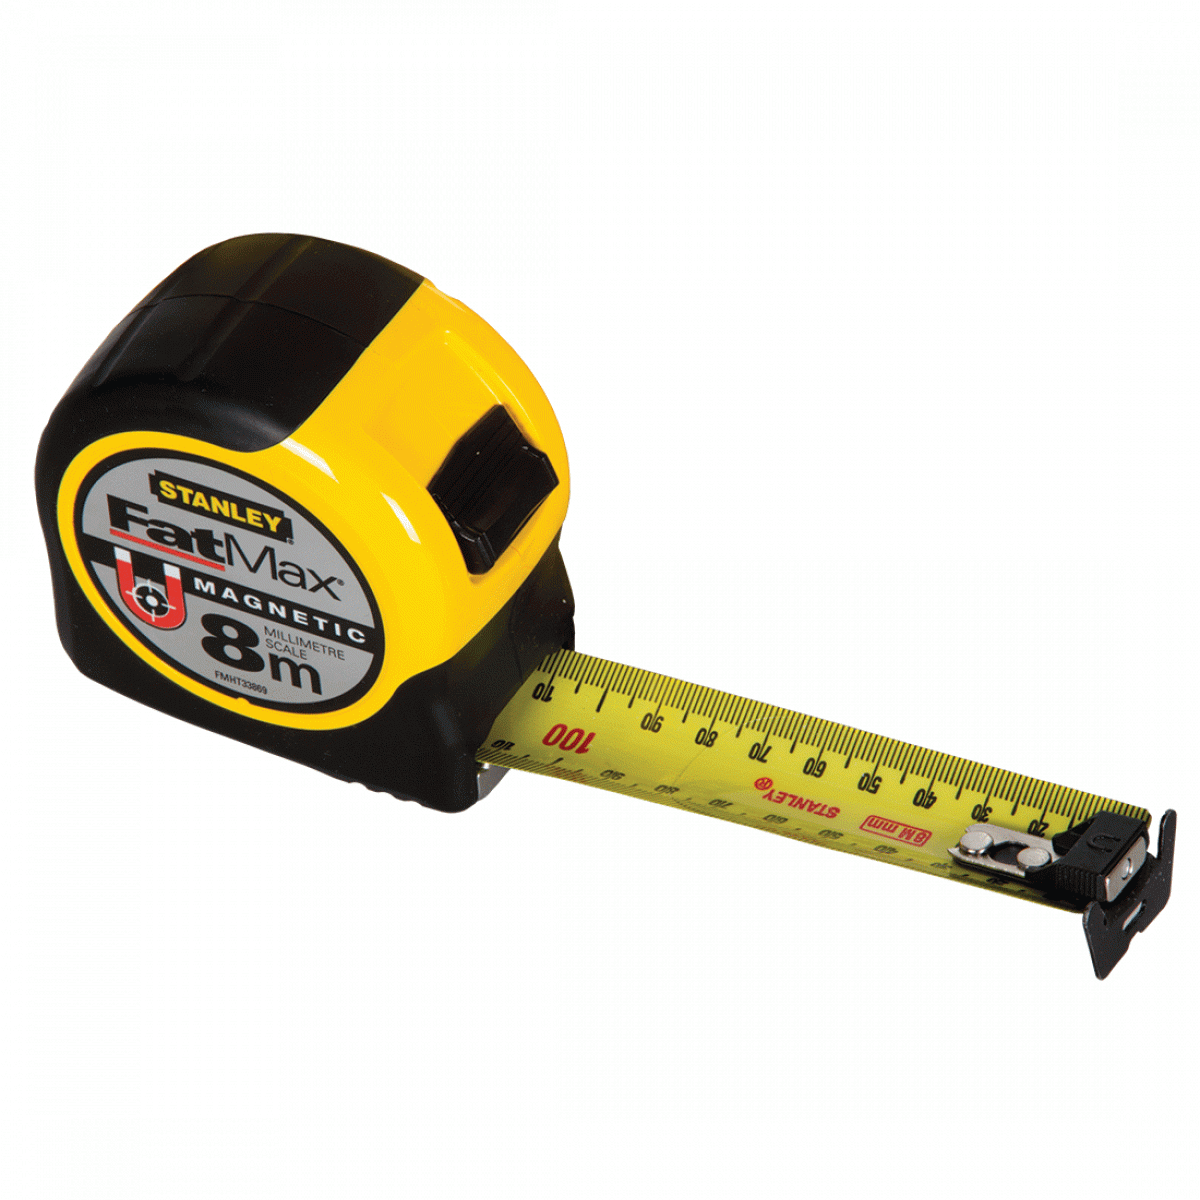 Stanley 8m x 32mm Fatmax Magnetic tape